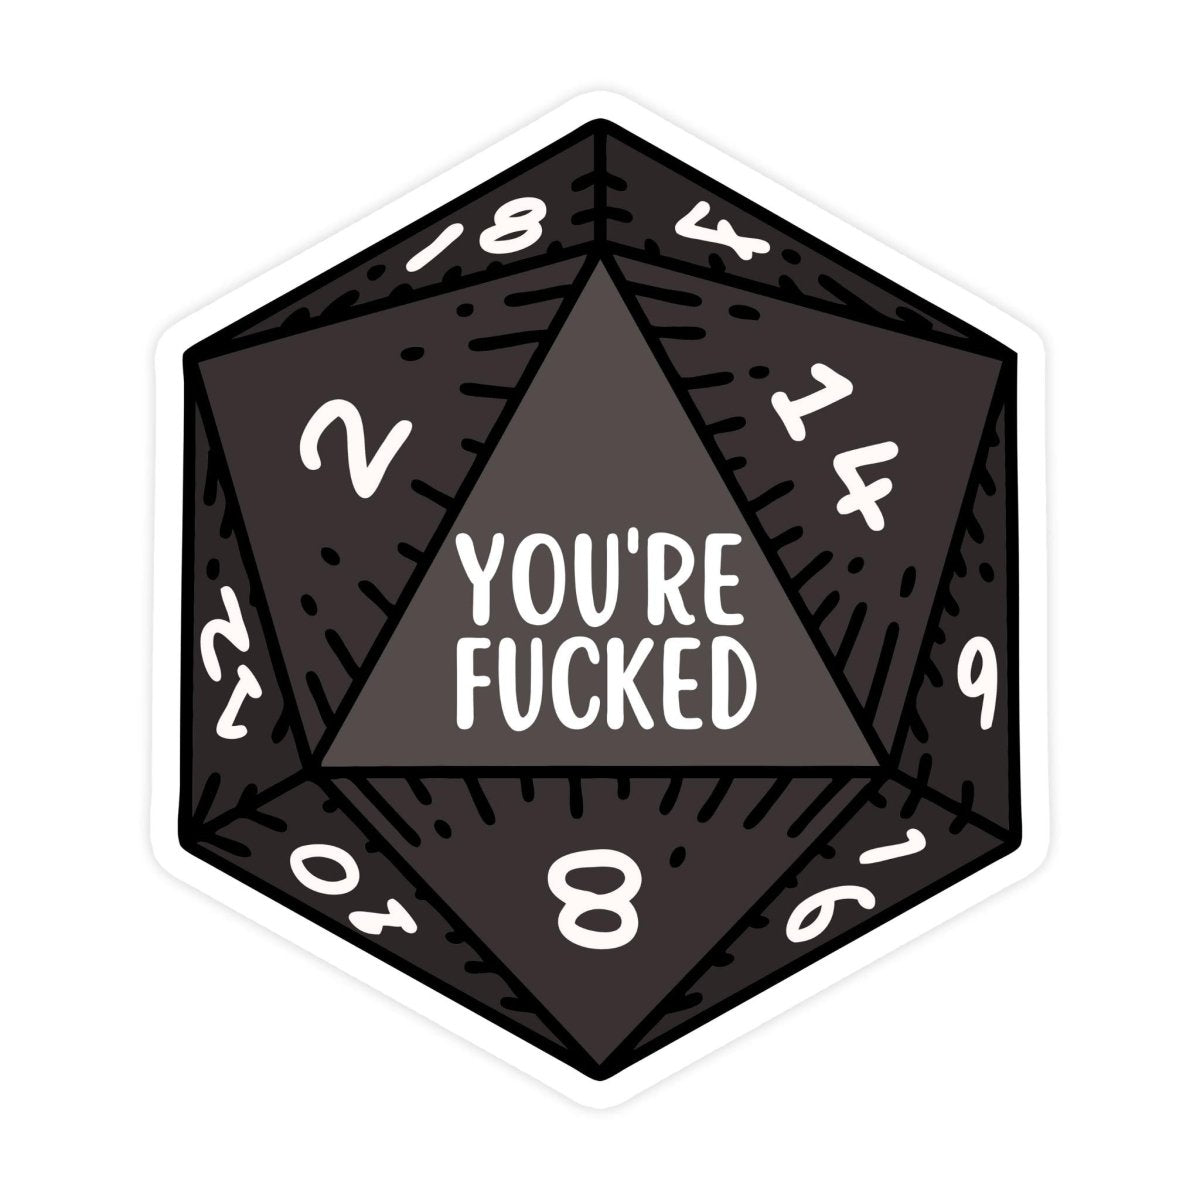 You're Fucked 20 Sided Dice Sticker - stickerbullYou're Fucked 20 Sided Dice StickerRetail StickerstickerbullstickerbullSage_Diceblock [#136]You're Fucked 20 Sided Dice Sticker